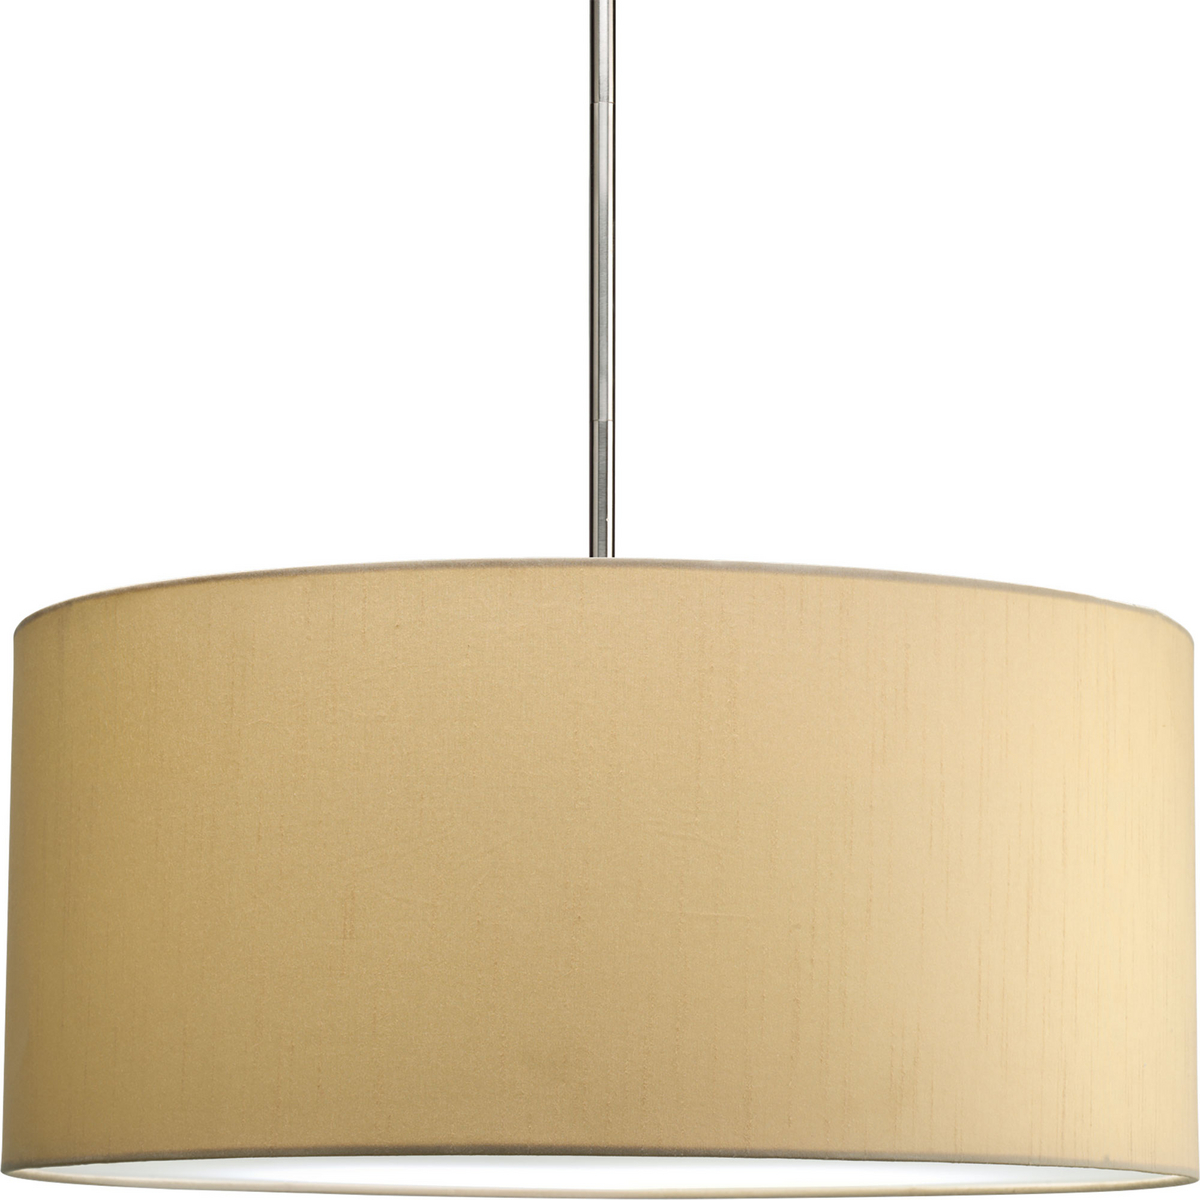 The Markor Series is a modular pendant system. The versatile series allow the choice of shades and stem kits. This 22 in shade with Beige Silken fabric is inspired by mid-century design. Acrylic bottom diffuser. This shade can be used with a variety of stem kits from 1 to 3 light in CFL, LED and incandescent light sources.